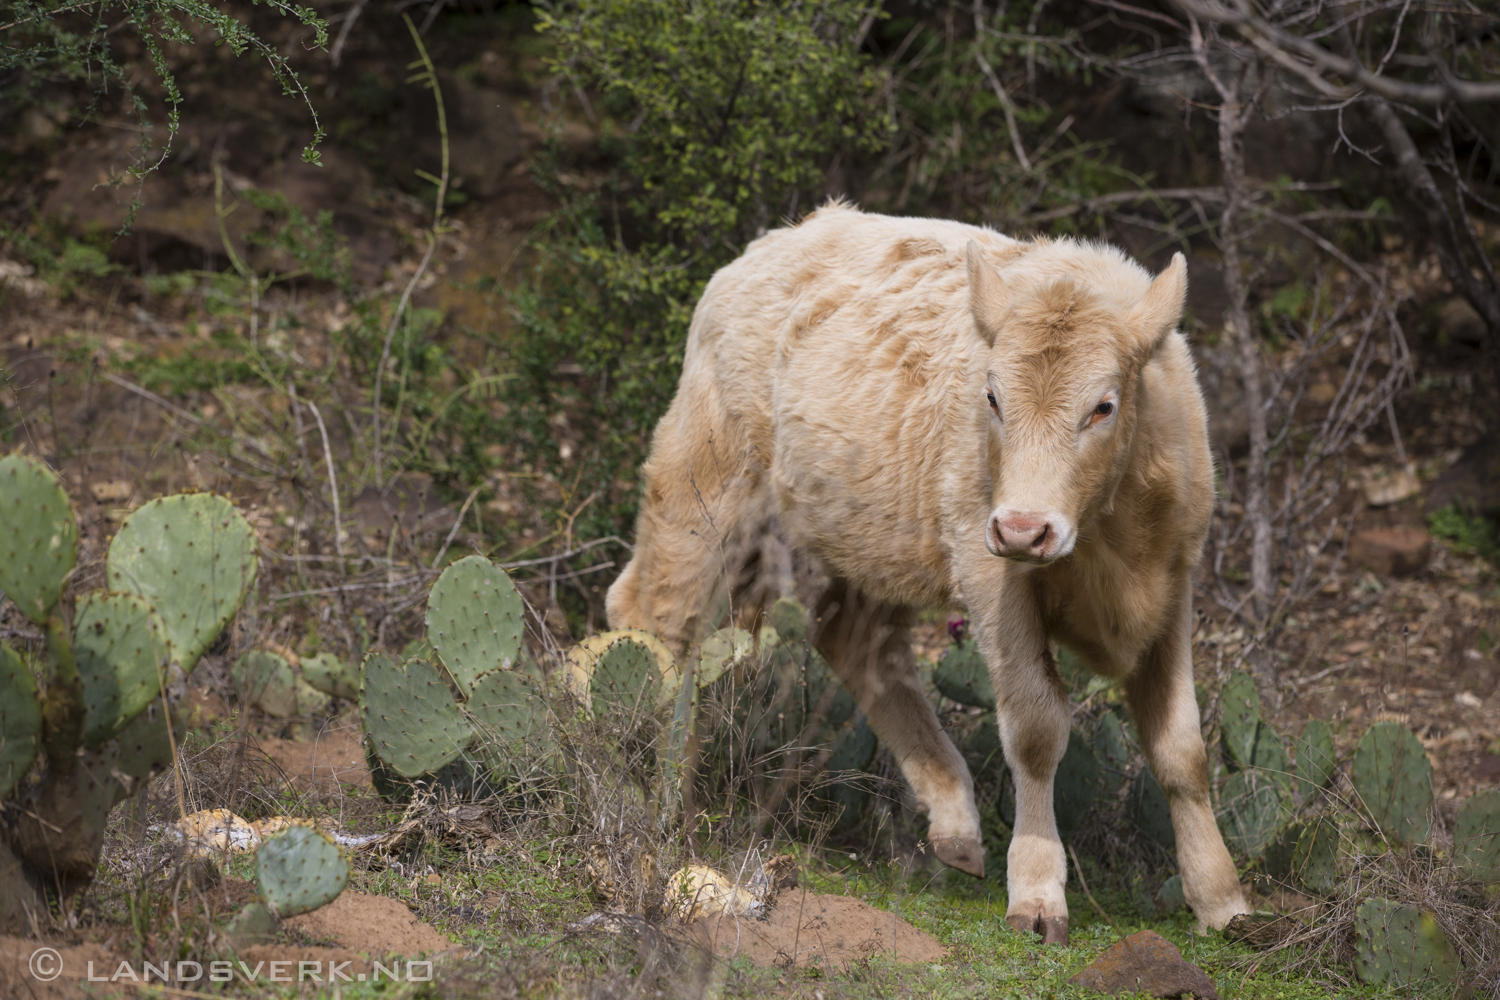 A cow and a cactus! Texas Hill Country. 

(Canon EOS 5D Mark III / Canon EF 70-200mm f/2.8 L IS II USM)